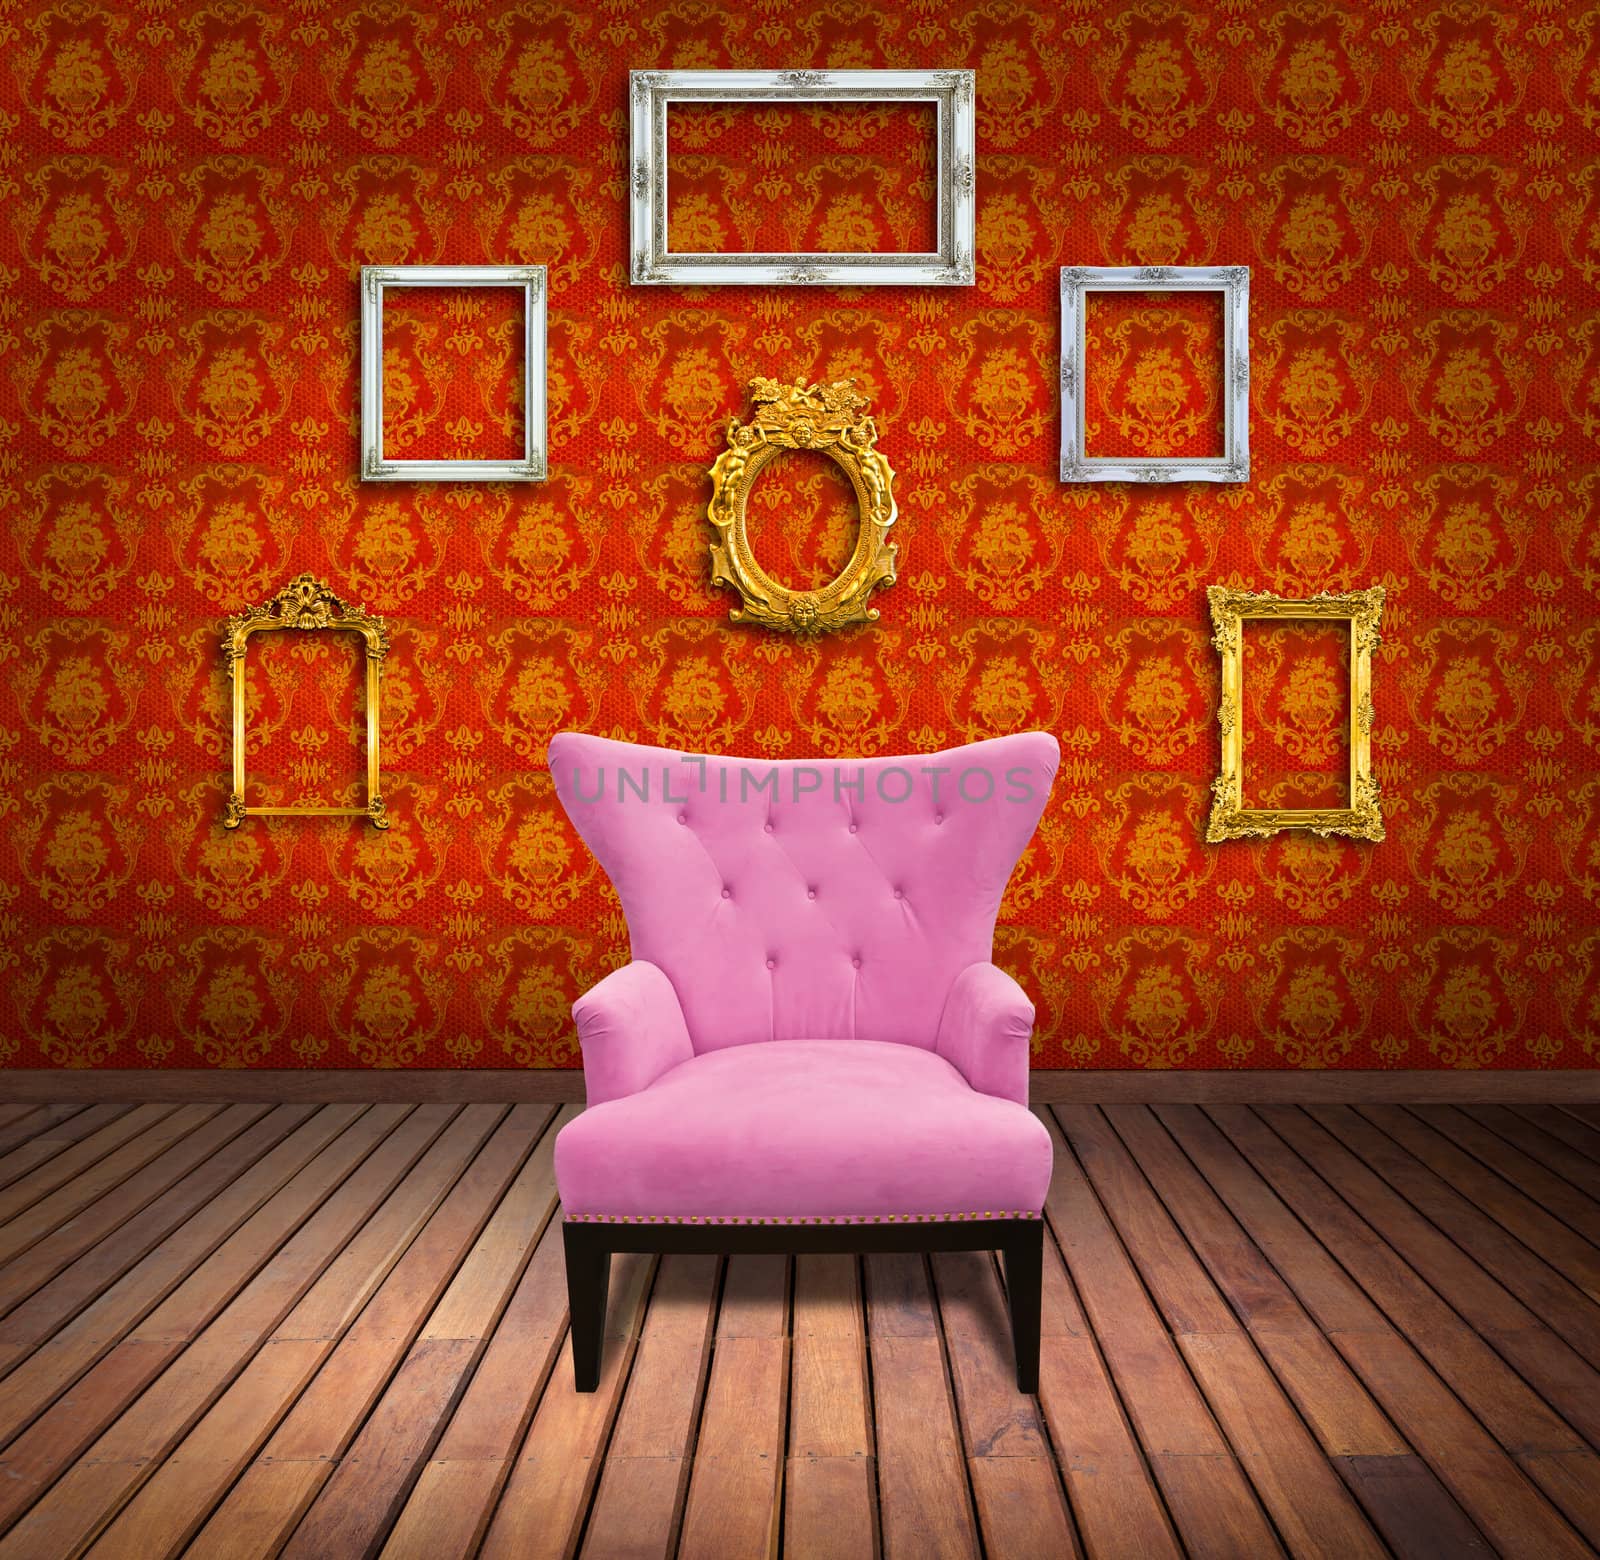 Sofa and frame in yellow wallpaper room by tungphoto